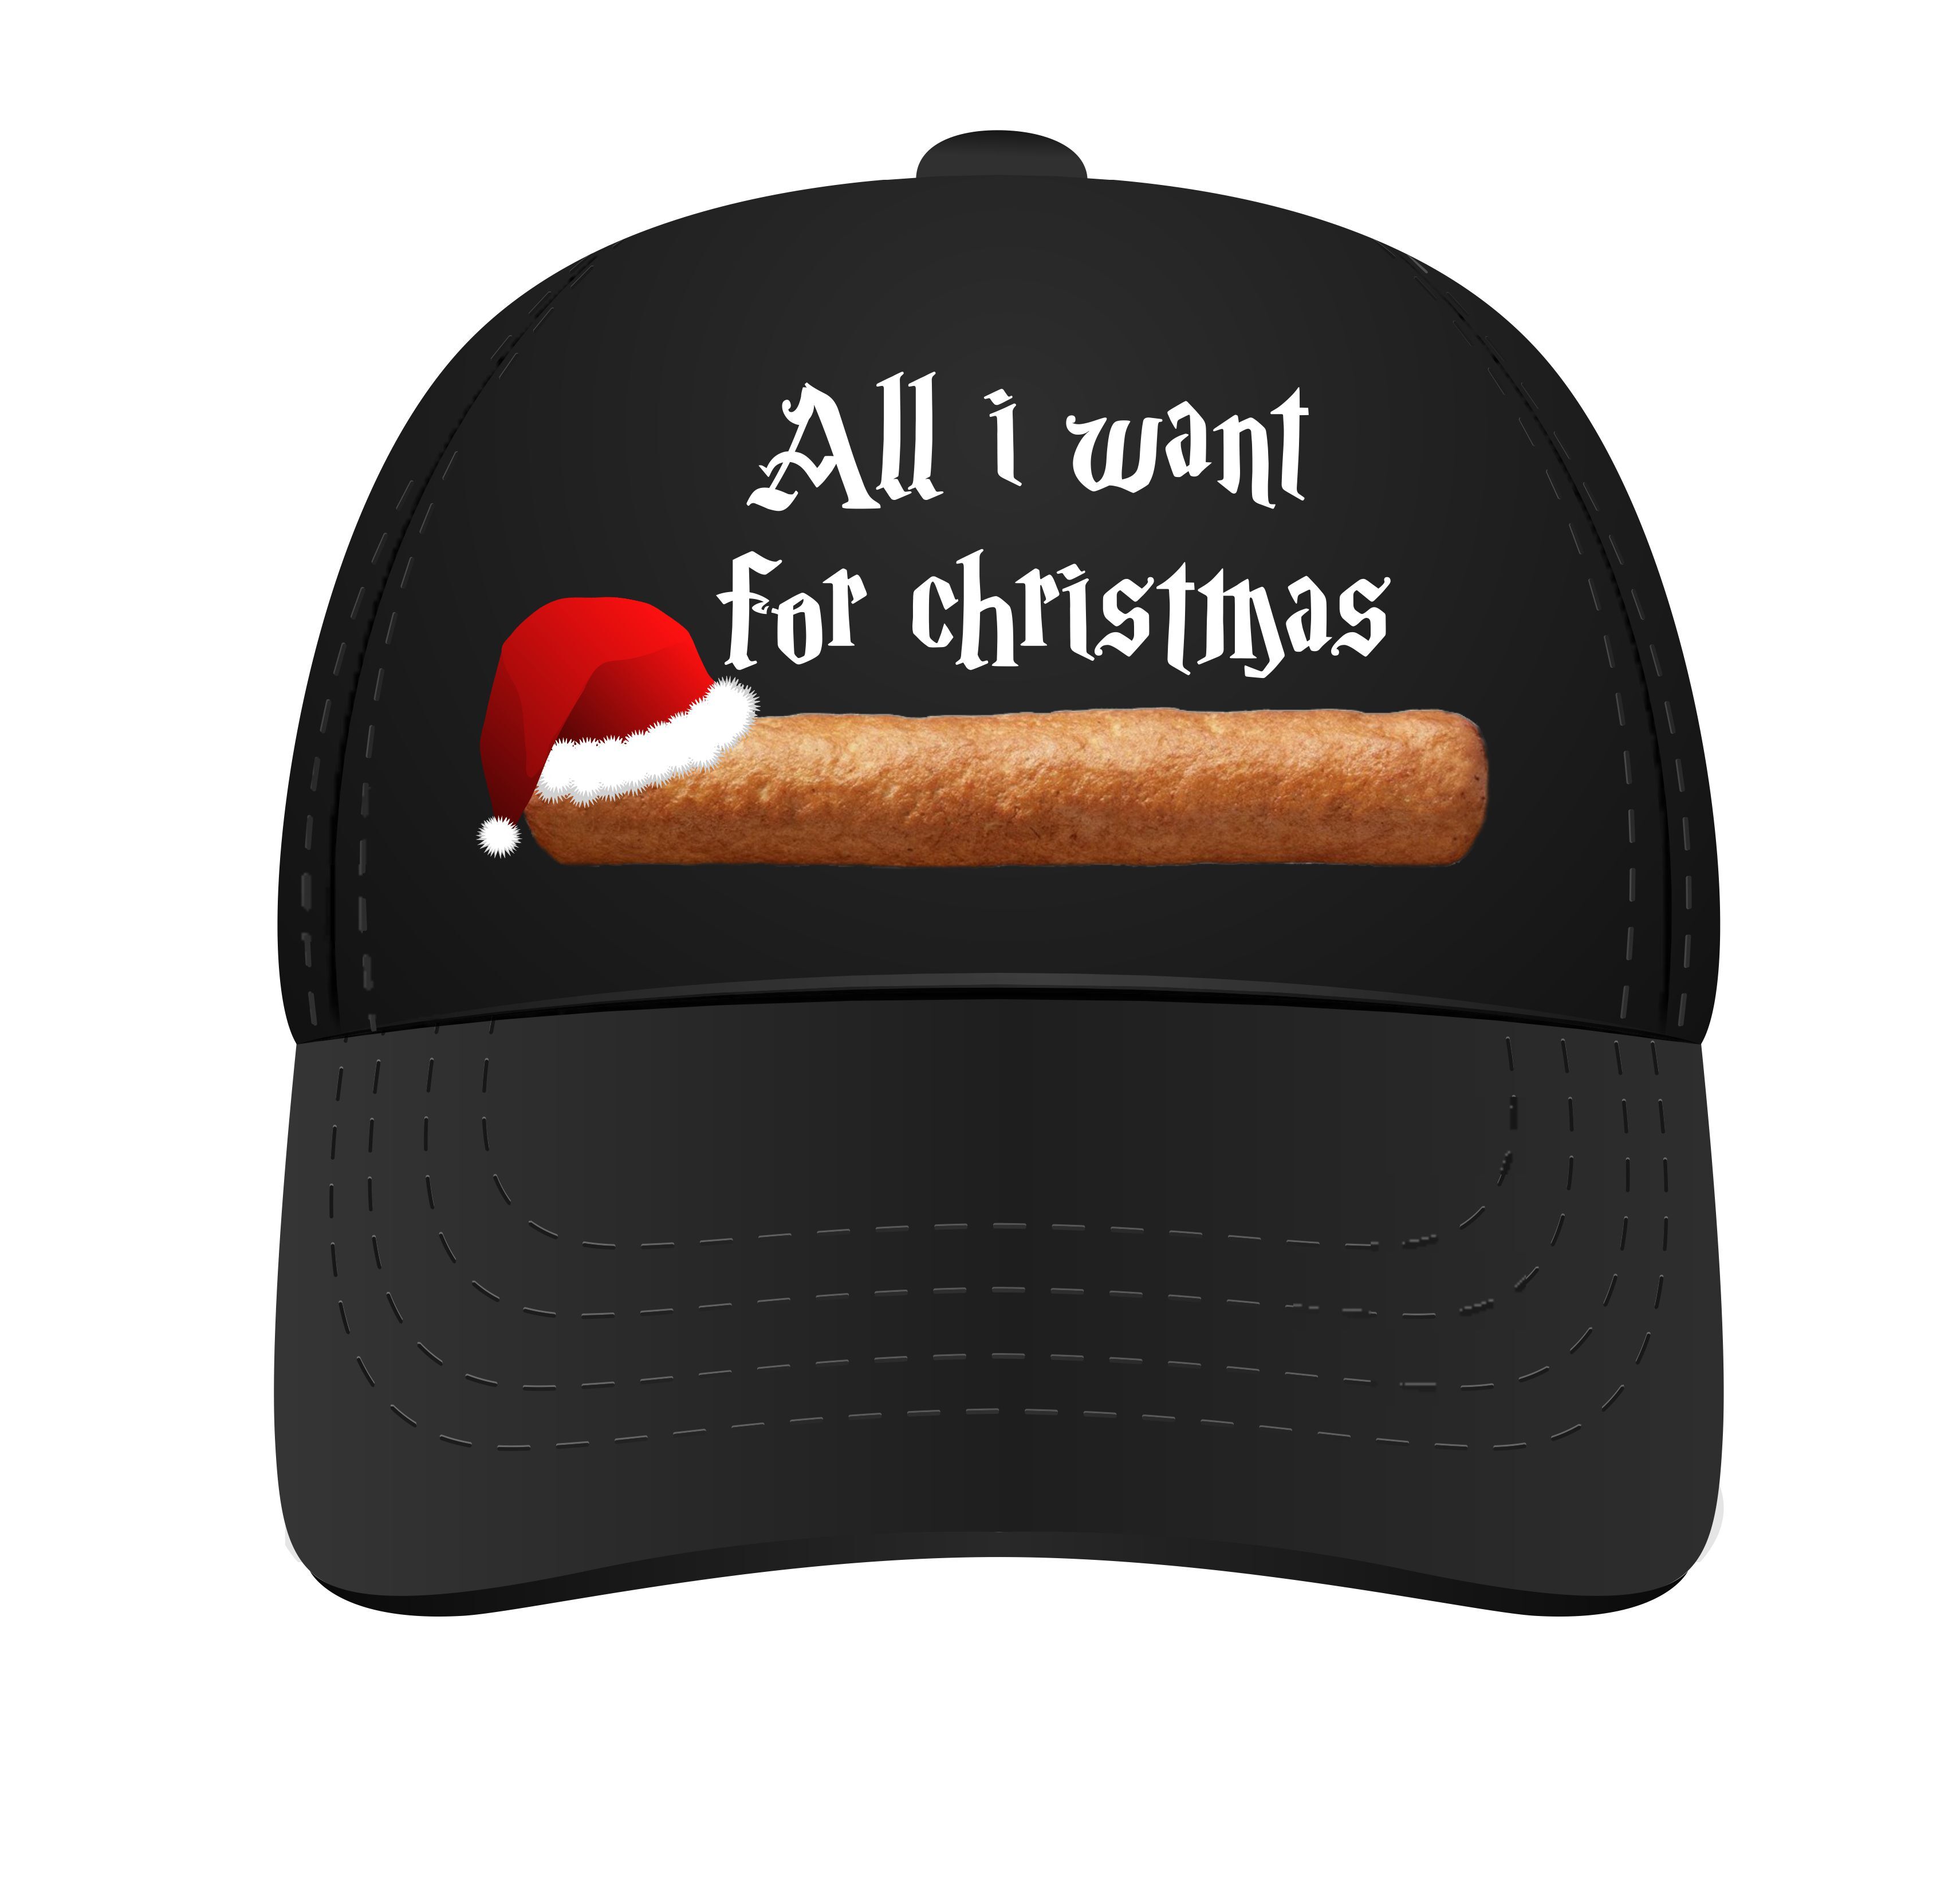 Kerst pet All i want for christmas is een frikandel